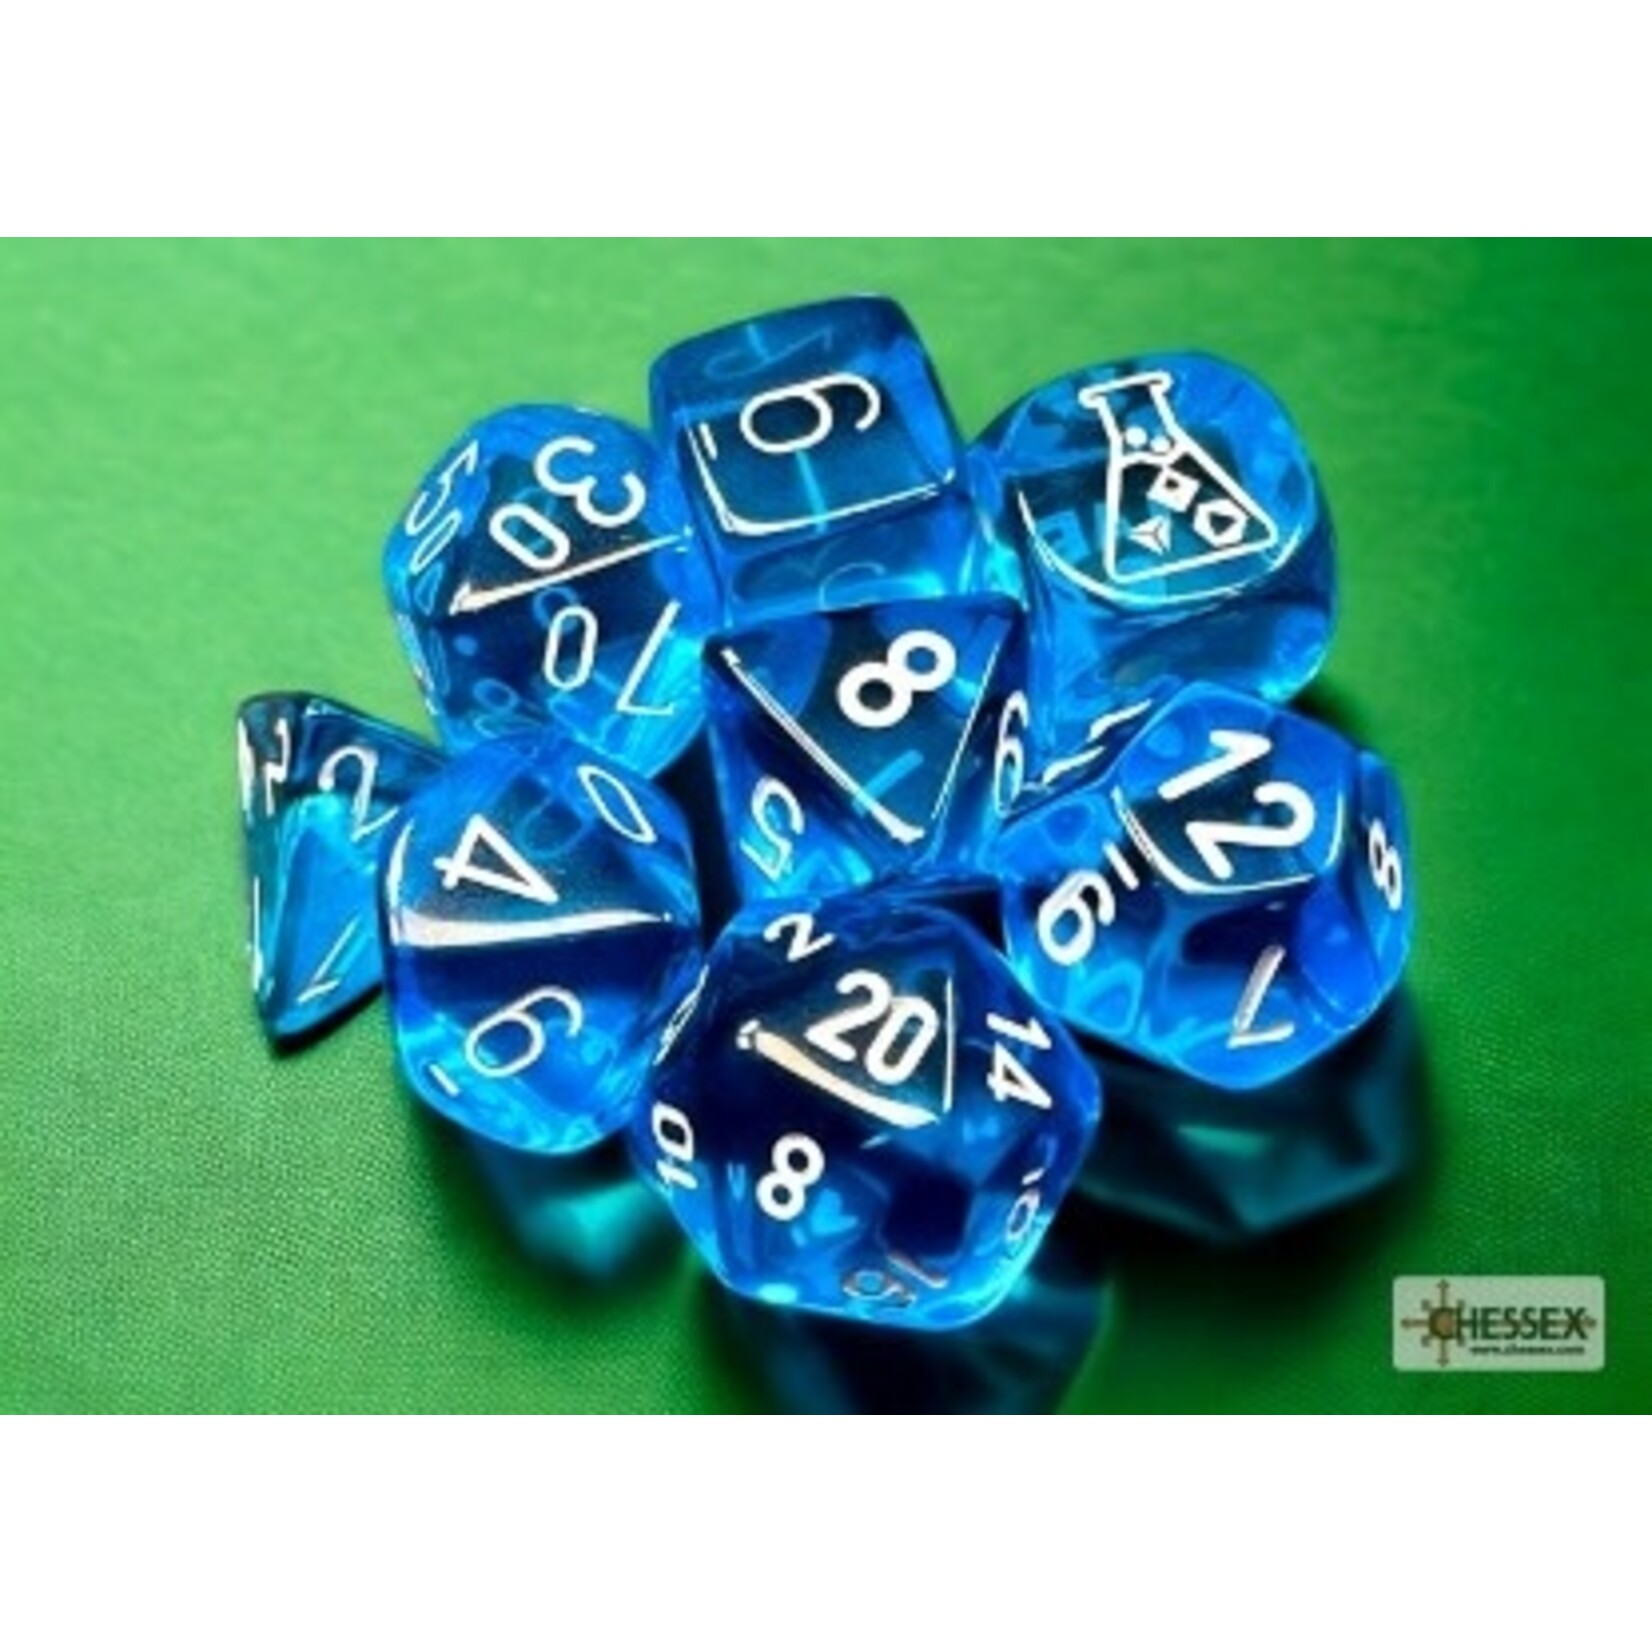 Chessex Translucent Tropical Blue/white Polyhedral 7-Dice Set (with bonus die)